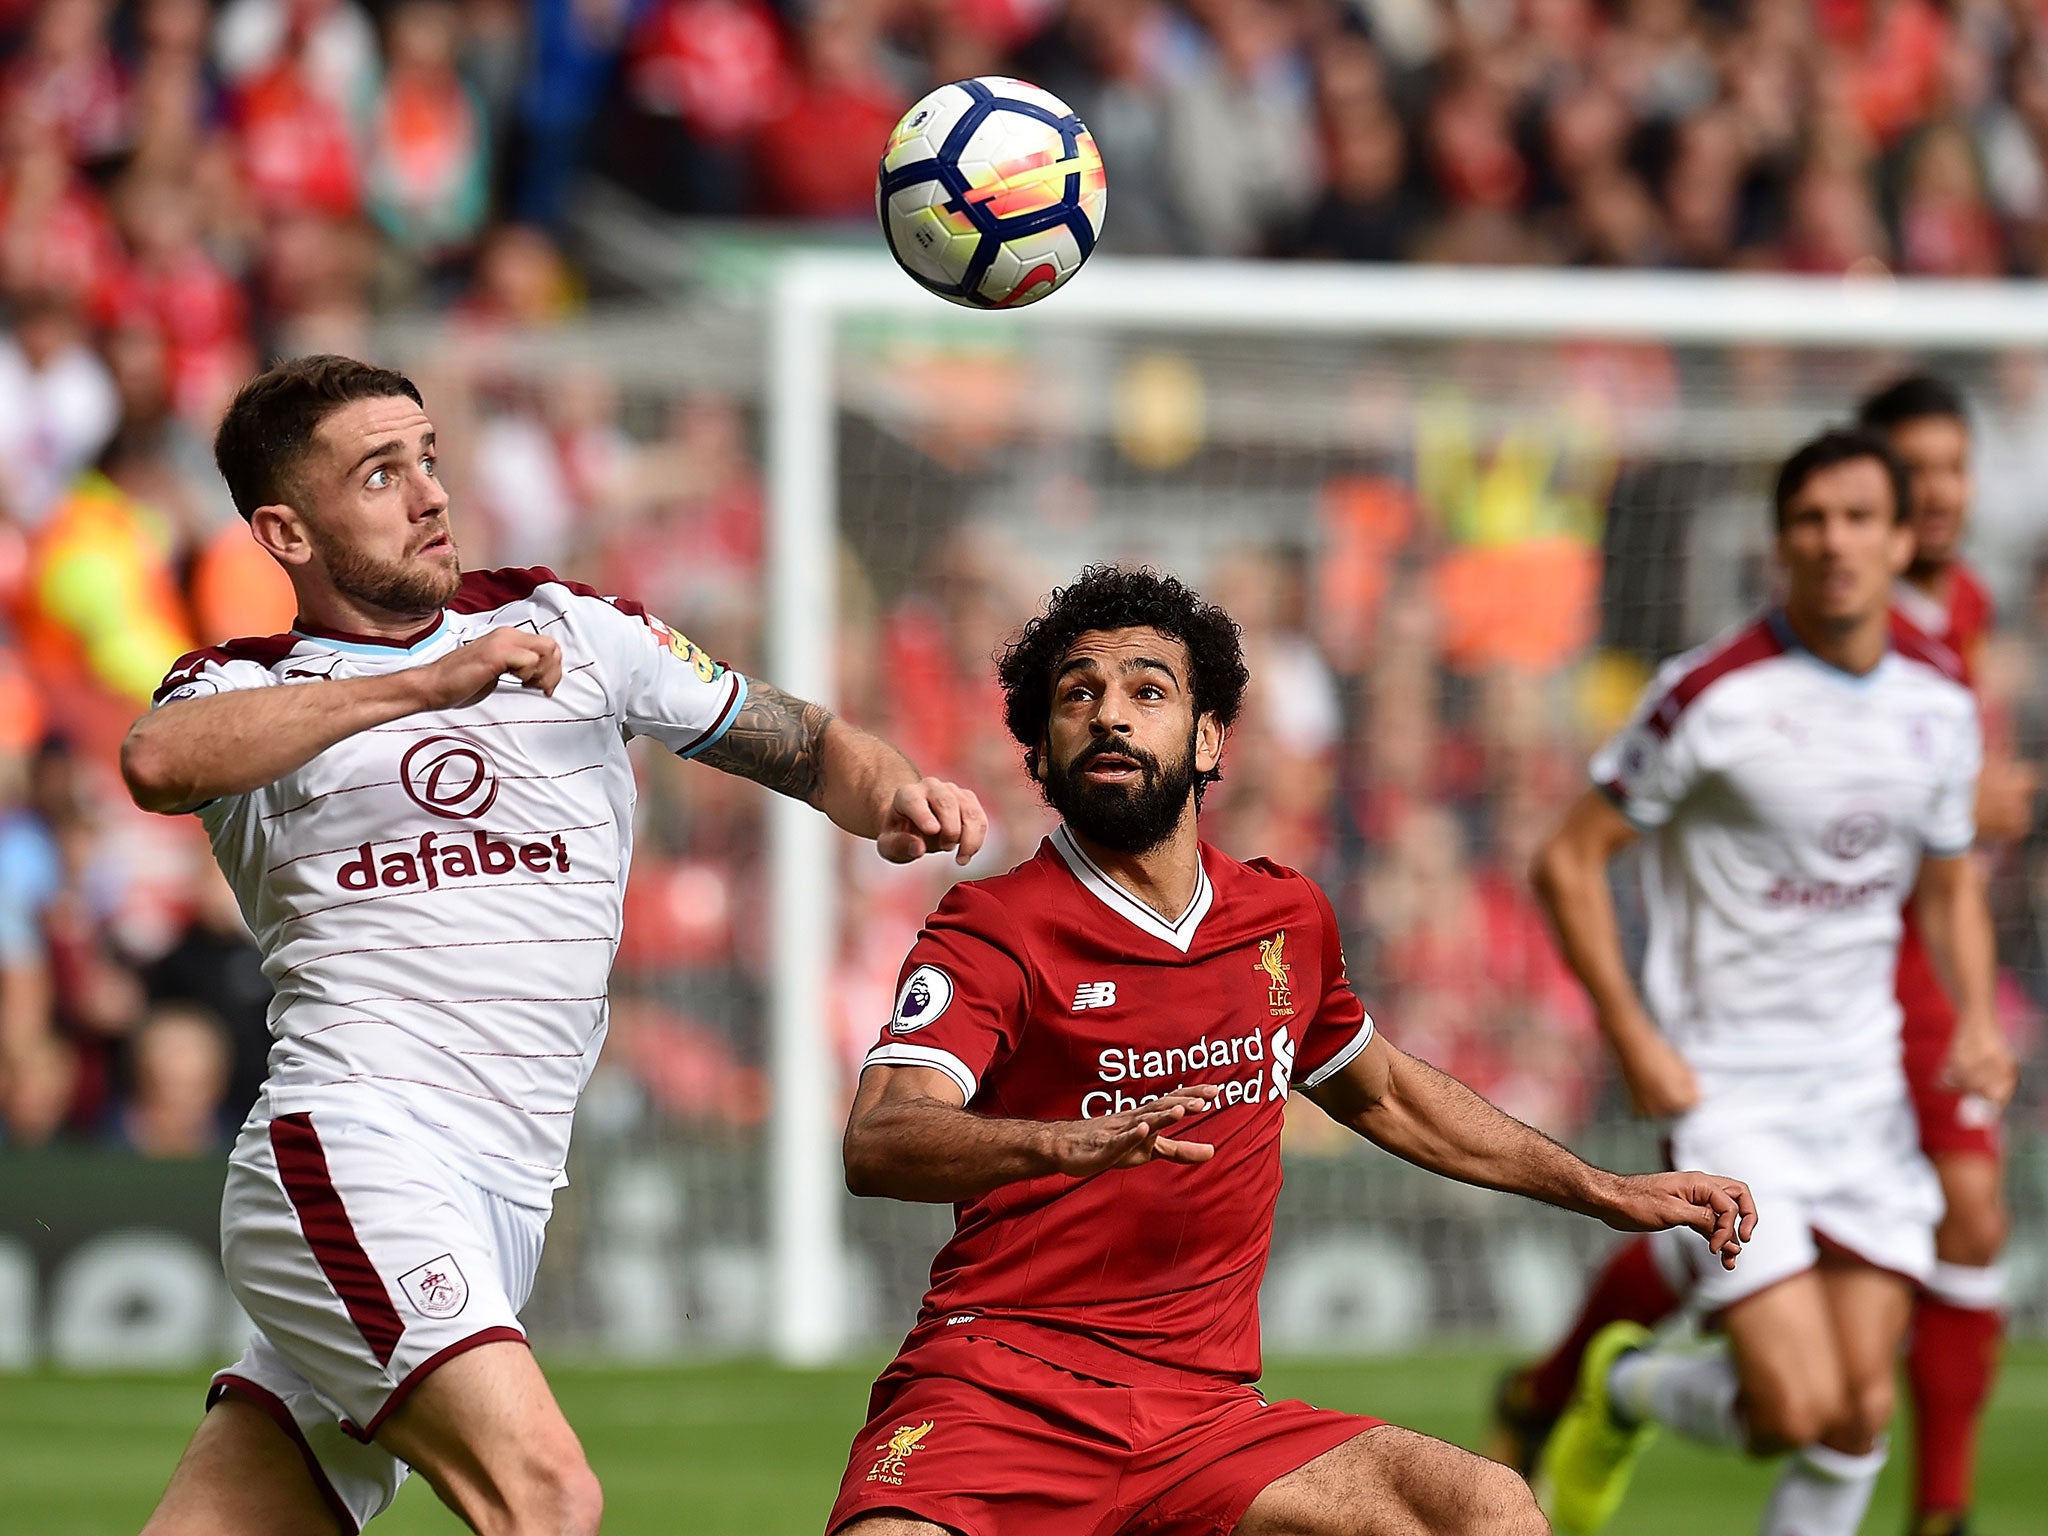 Liverpool were held to a 1-1 draw by Burnley over the weekend